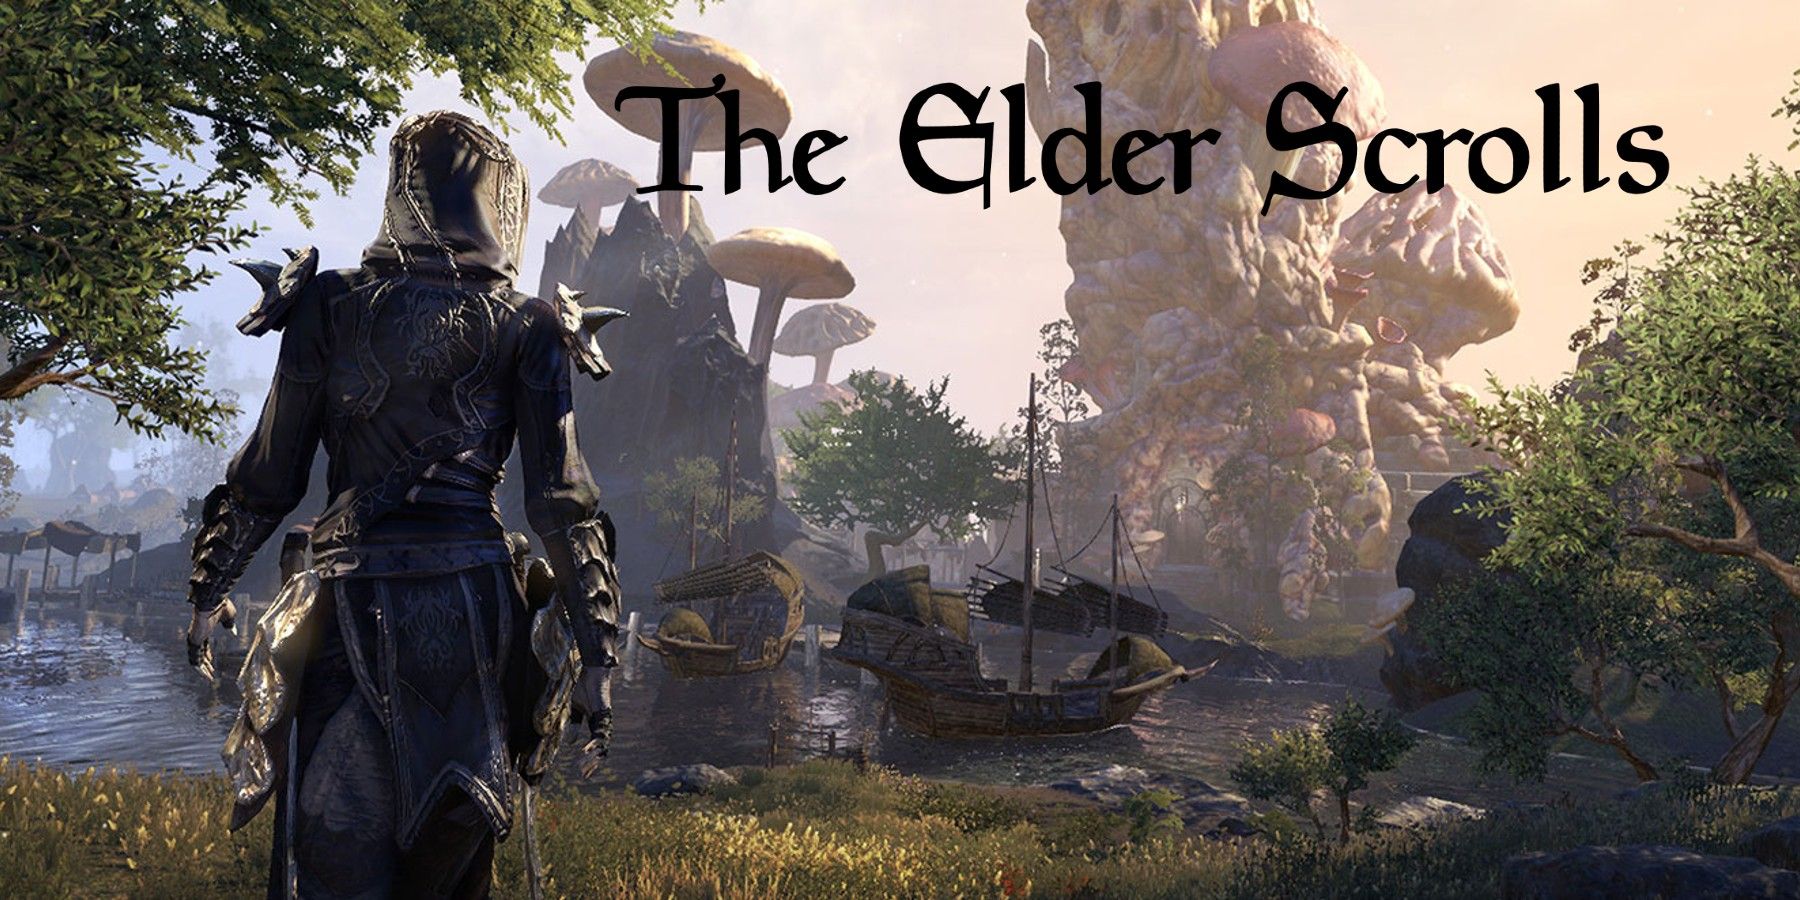 the-elder-scrolls-series-history-important-moments